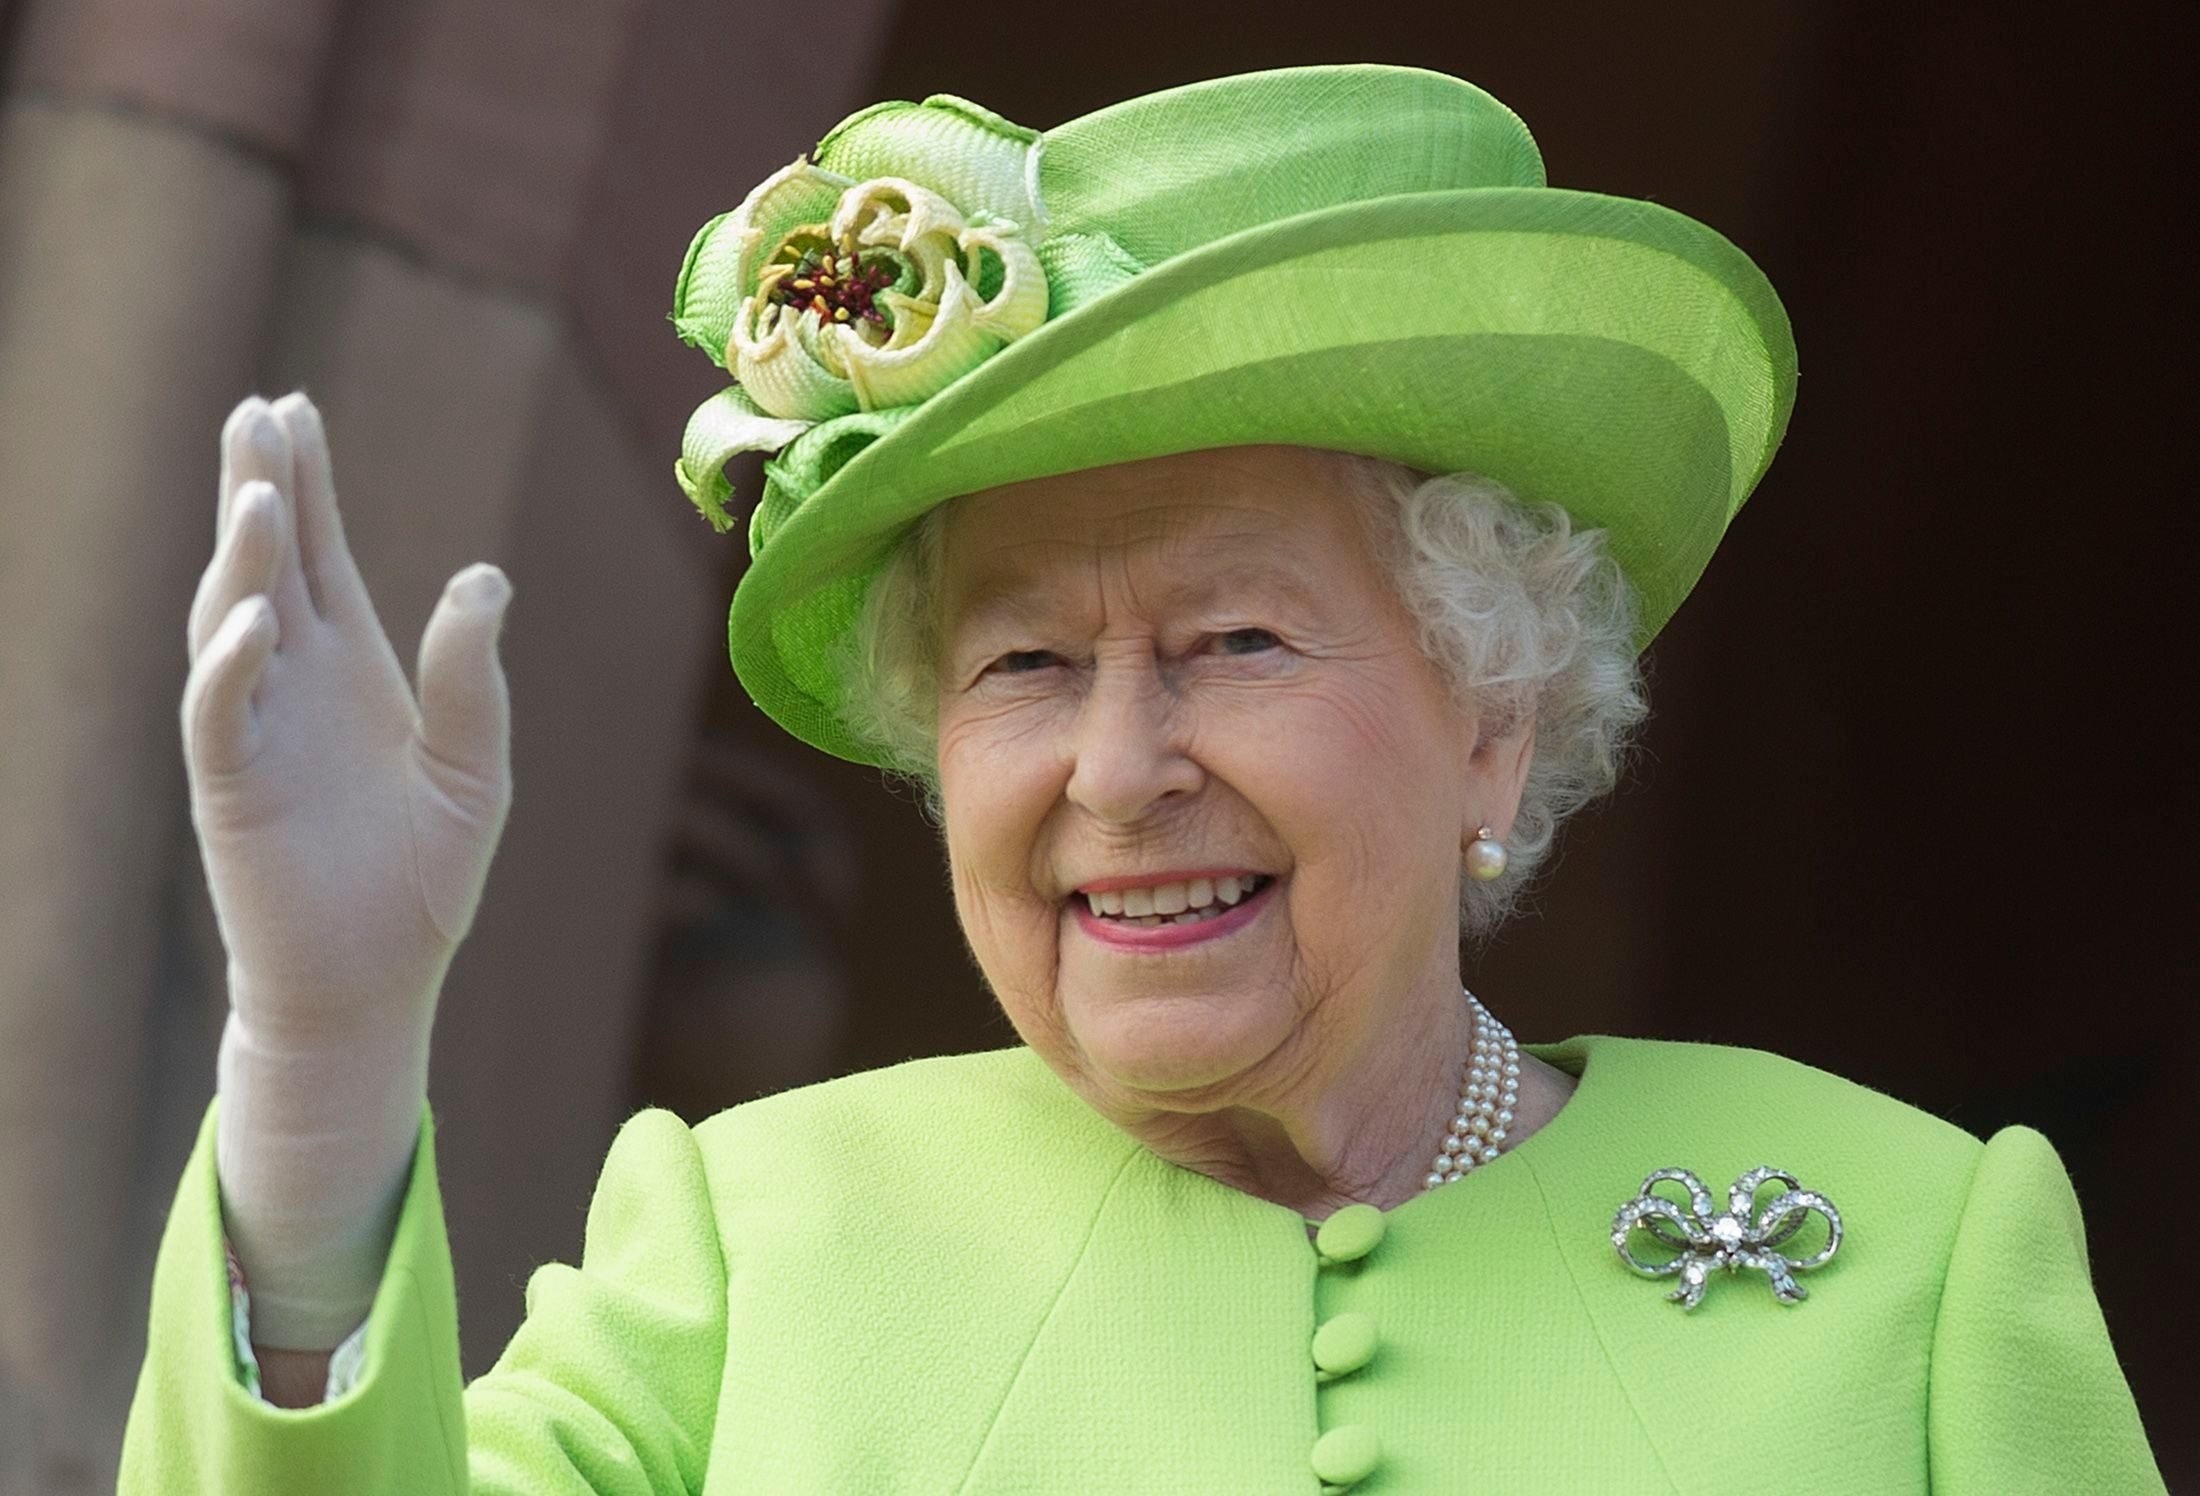 28 Things Queen Elizabeth II Can Do The Role Of The Queen Of England